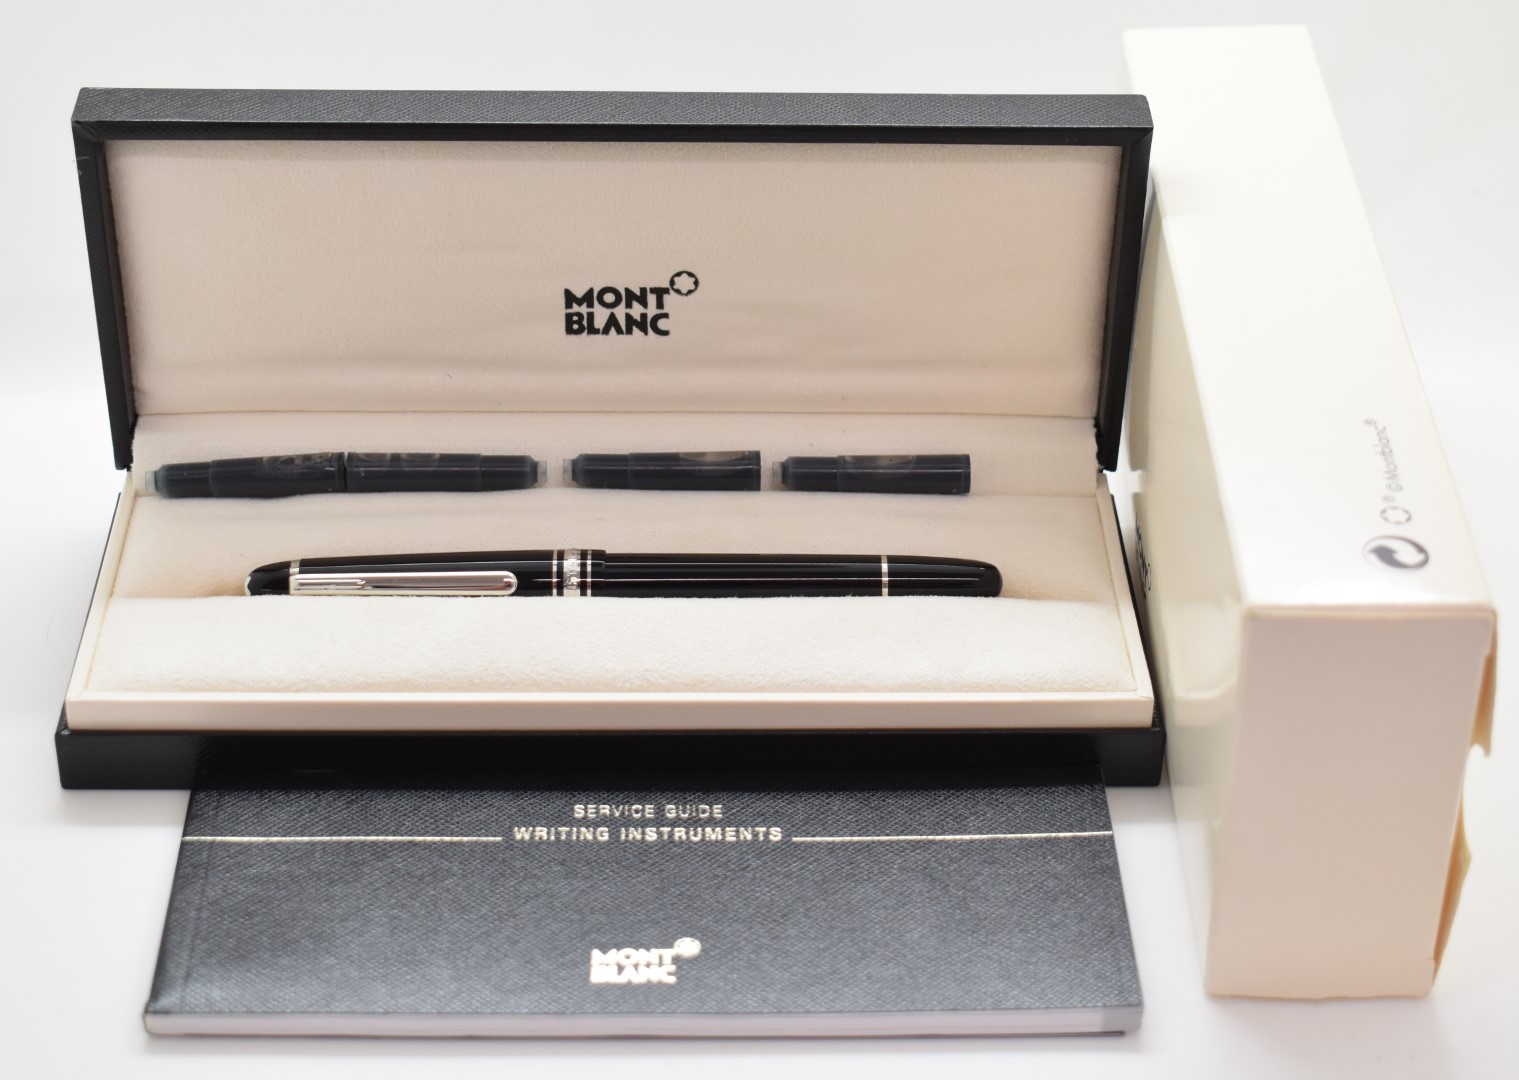 Montblanc Meisterstuck fountain pen with 14k gold nib marked 4810, in original box with service - Image 2 of 16